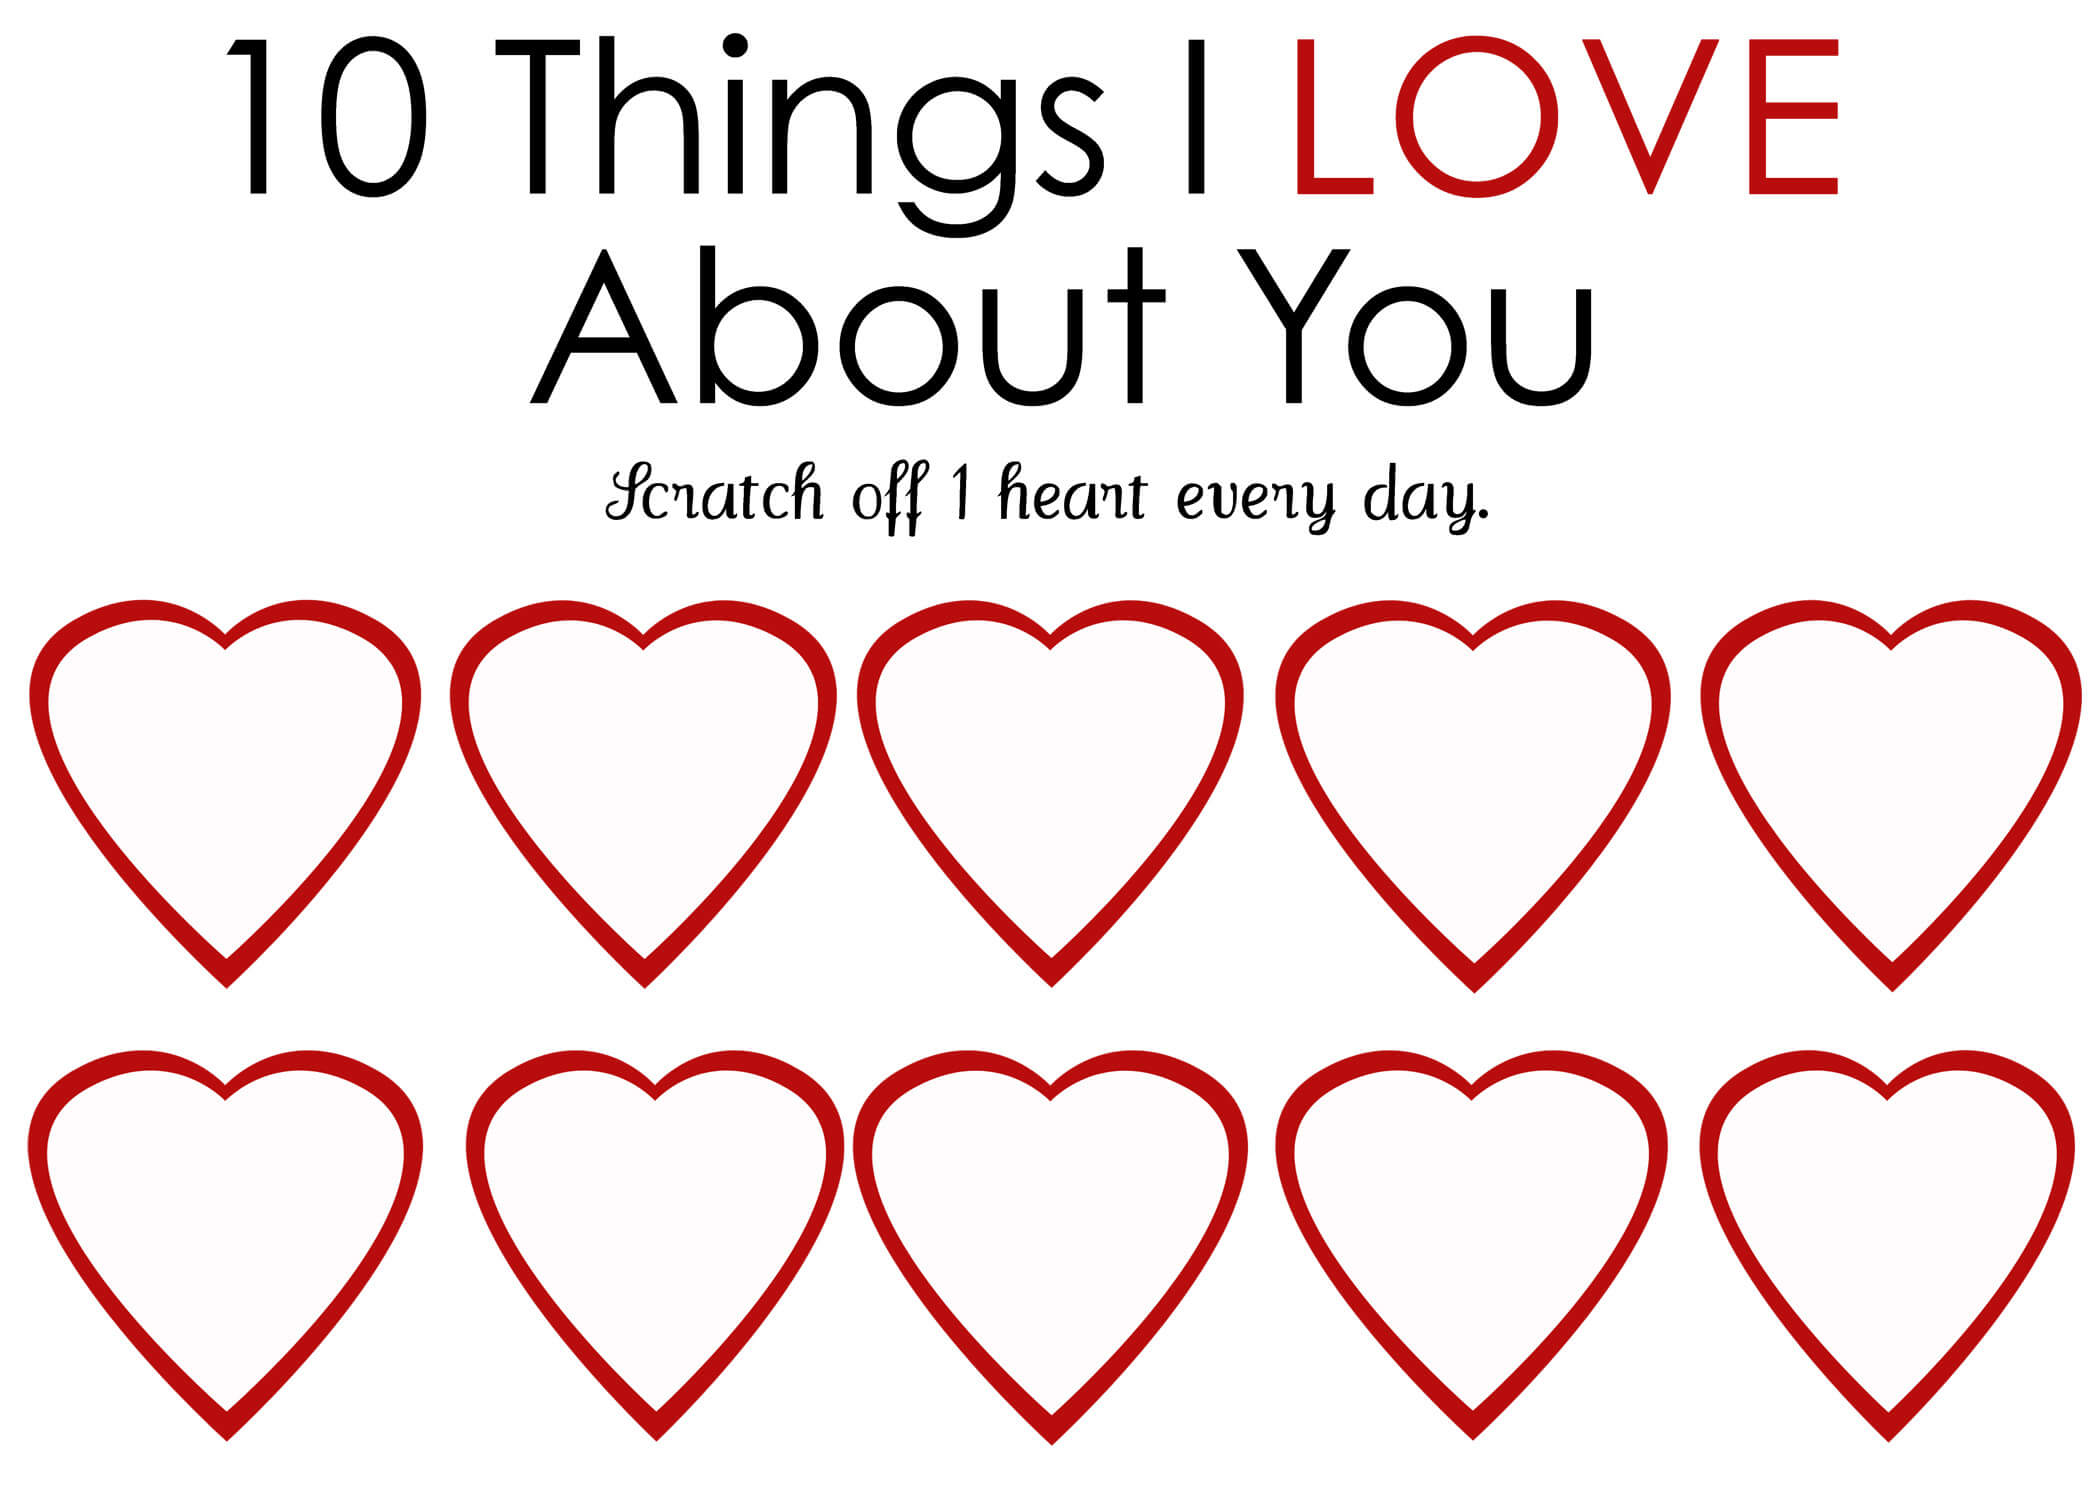 Printable Scratch Off Card {Easy Peasy Valentine} Regarding 52 Things I Love About You Cards Template